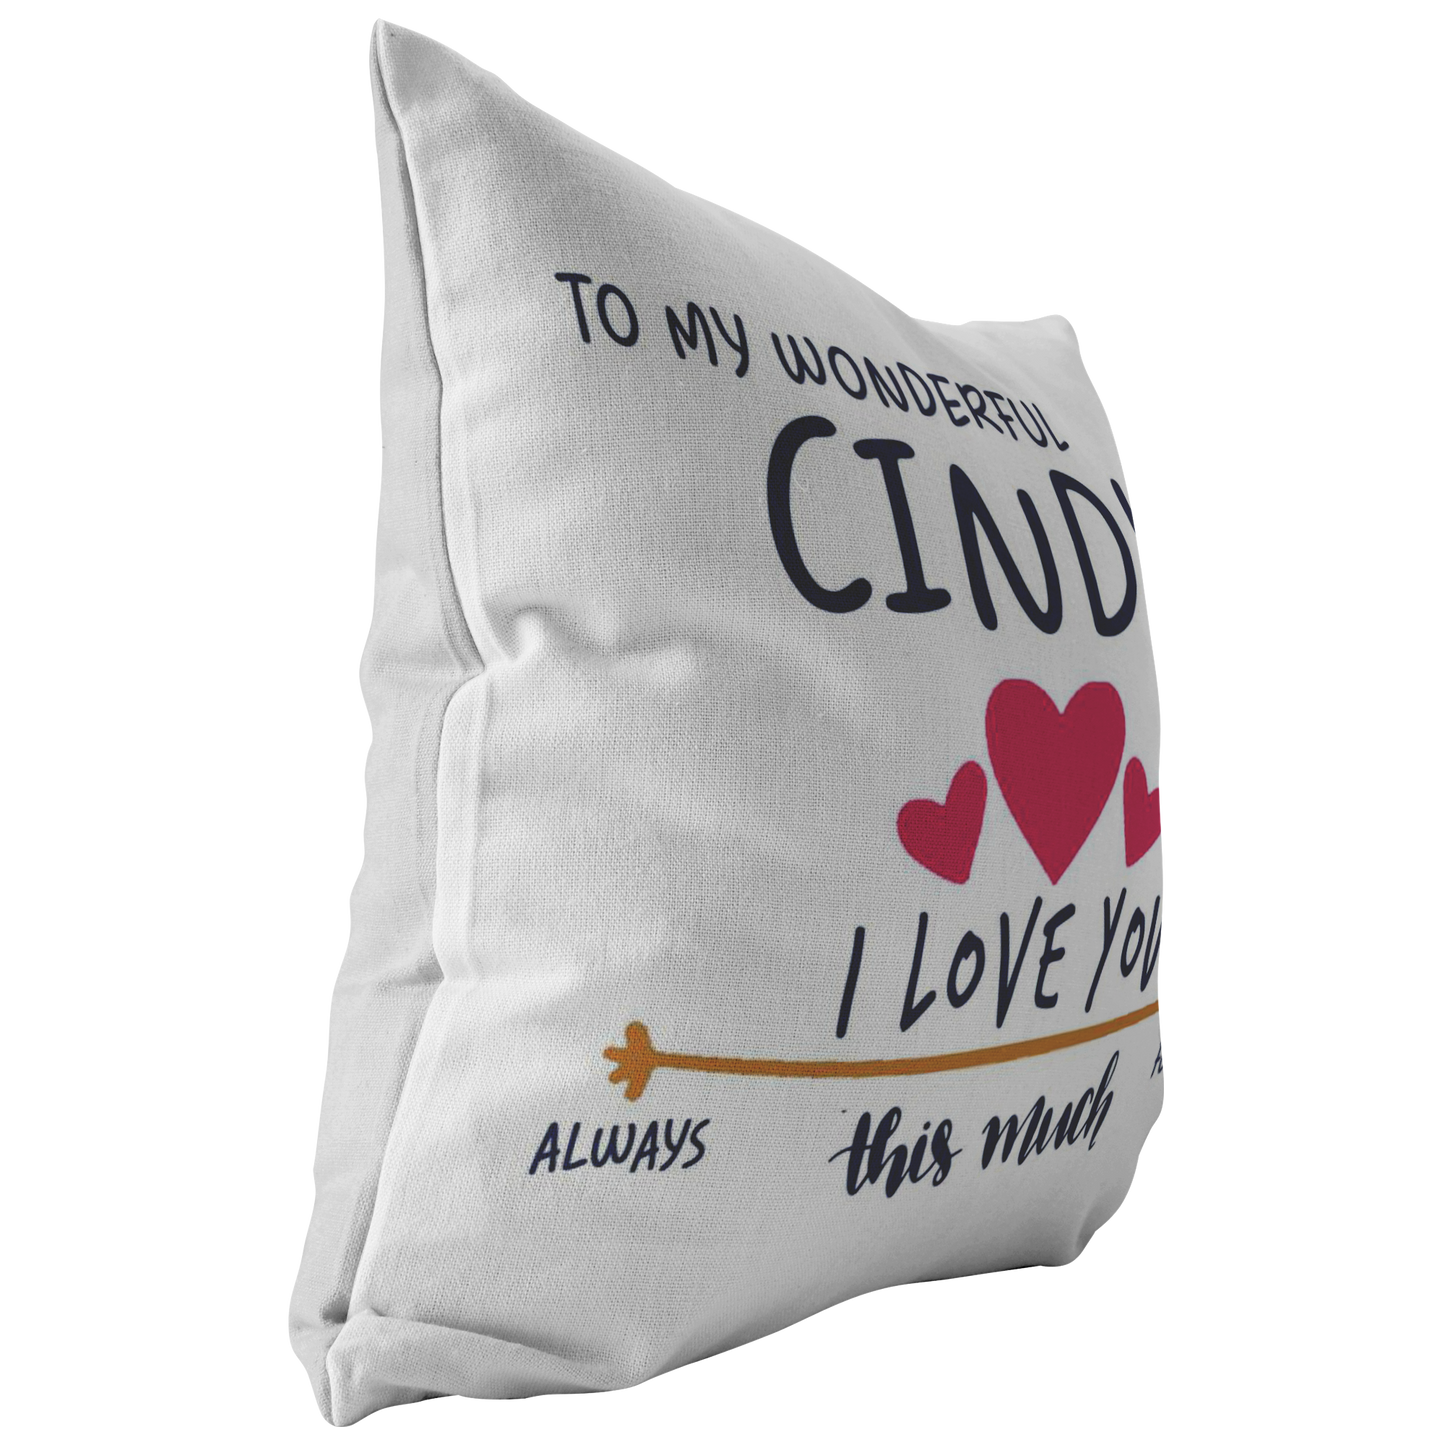 PL-21250723-sp-27489 - [ Cindy | 1 | 1 ] (PI_ThrowPillowCovers) Valentines Day Pillow Covers 18x18 - to My Wonderful Cindy I